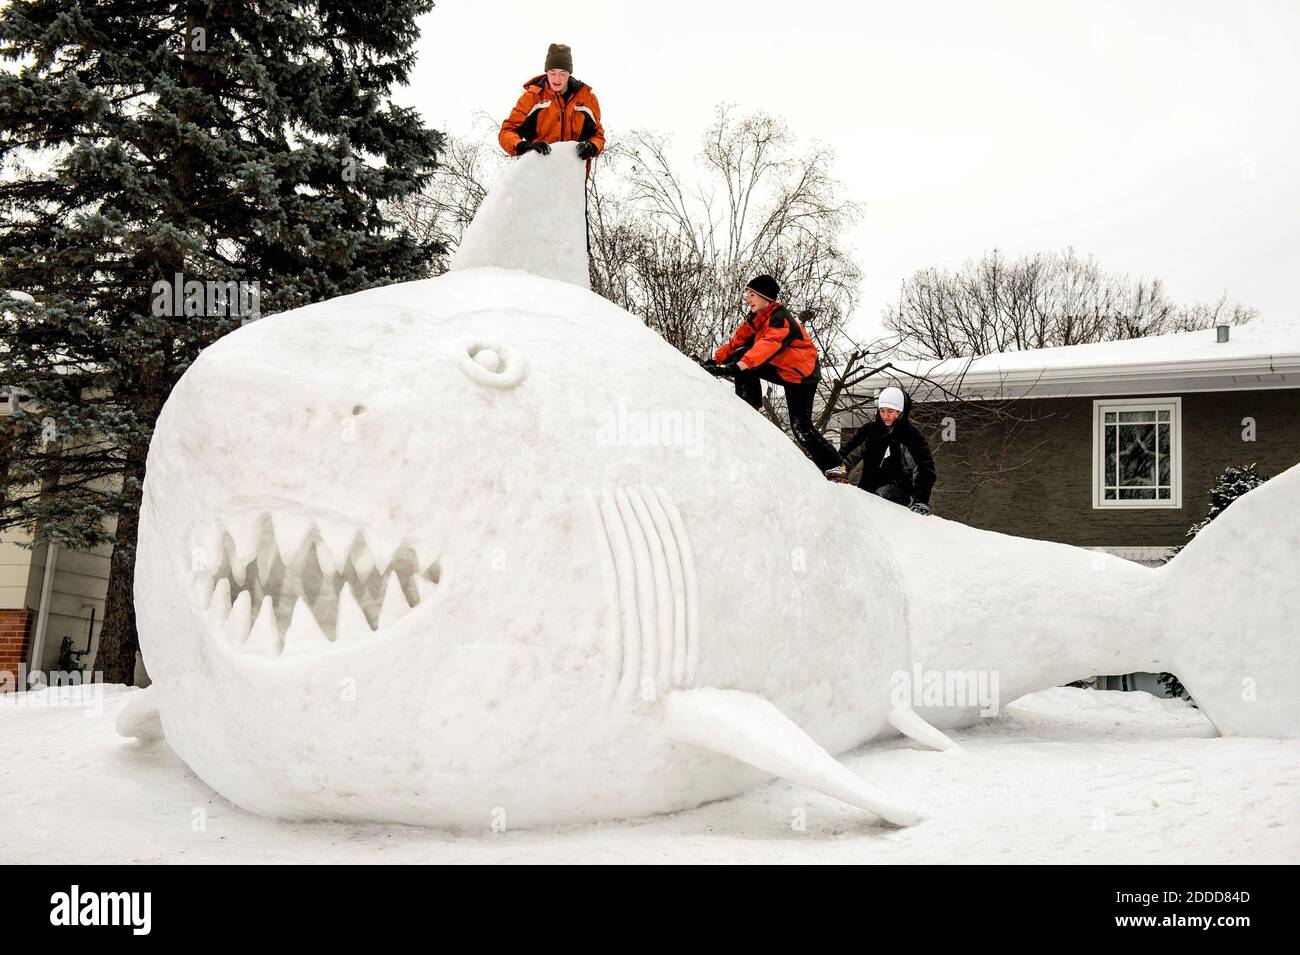 NO FILM, NO VIDEO, NO TV, NO DOCUMENTARY - Trevor, from left, Connor, and Austin Bartz, seen on January 1, 2014, built a16-foot high snow shark at their New Brighton, Minneapolis, MN, USA. It took the brothers around 95 hours. Photo by Glen Stubbe/Minneapolis Star Tribune/MCT/ABACAPRESS.COM Stock Photo